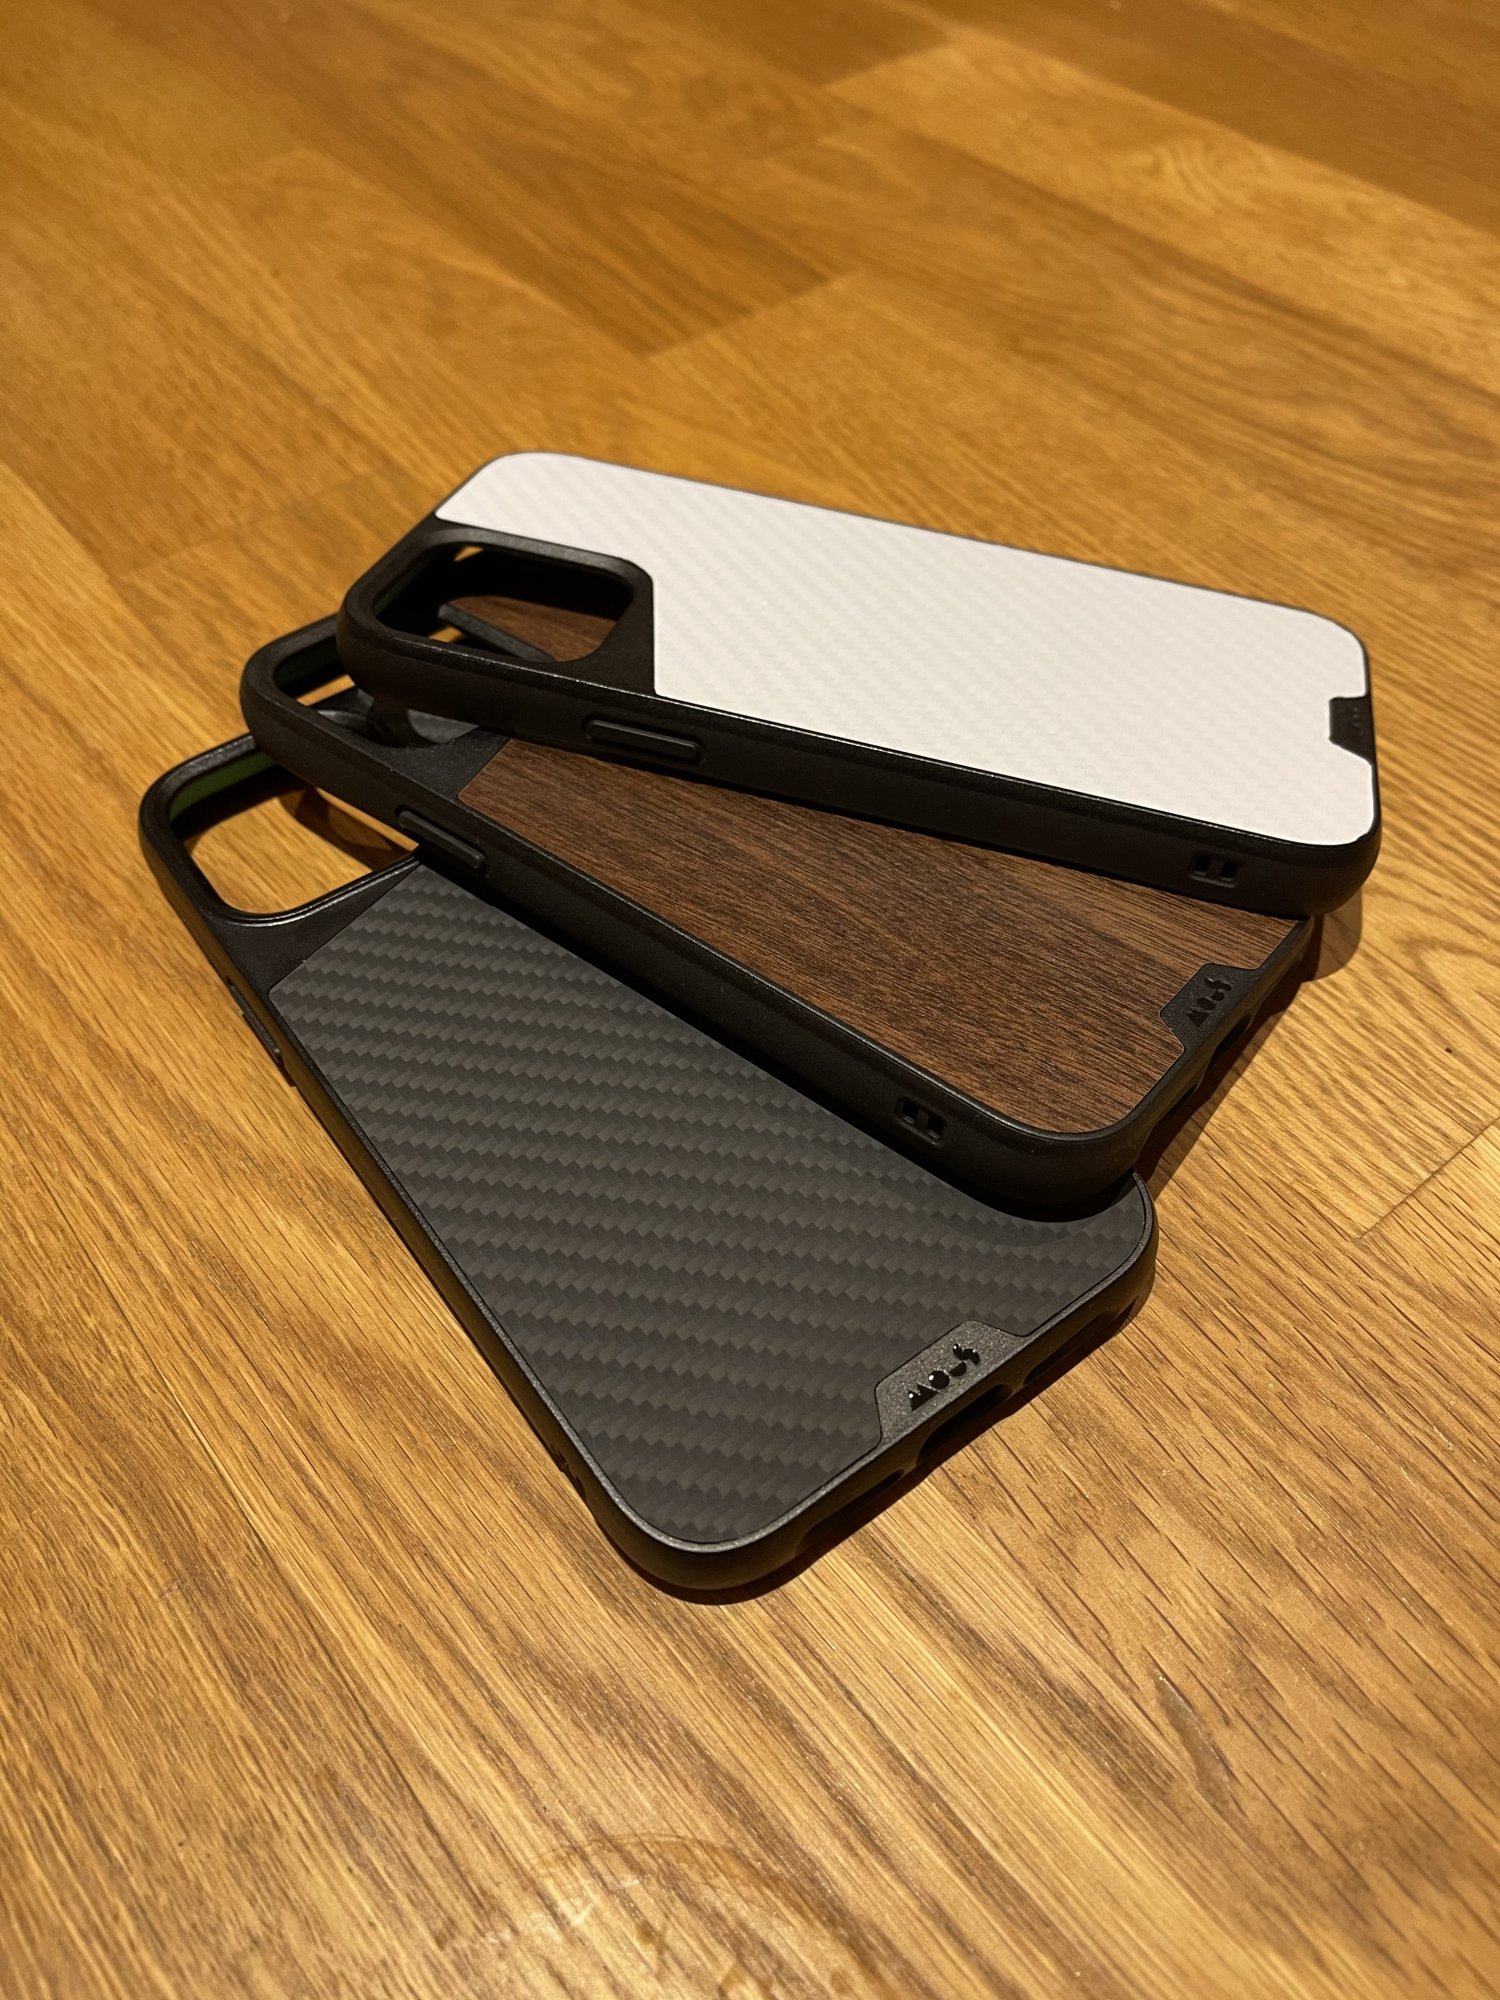 Speckled Fabric Phone Case - Limitless 3.0